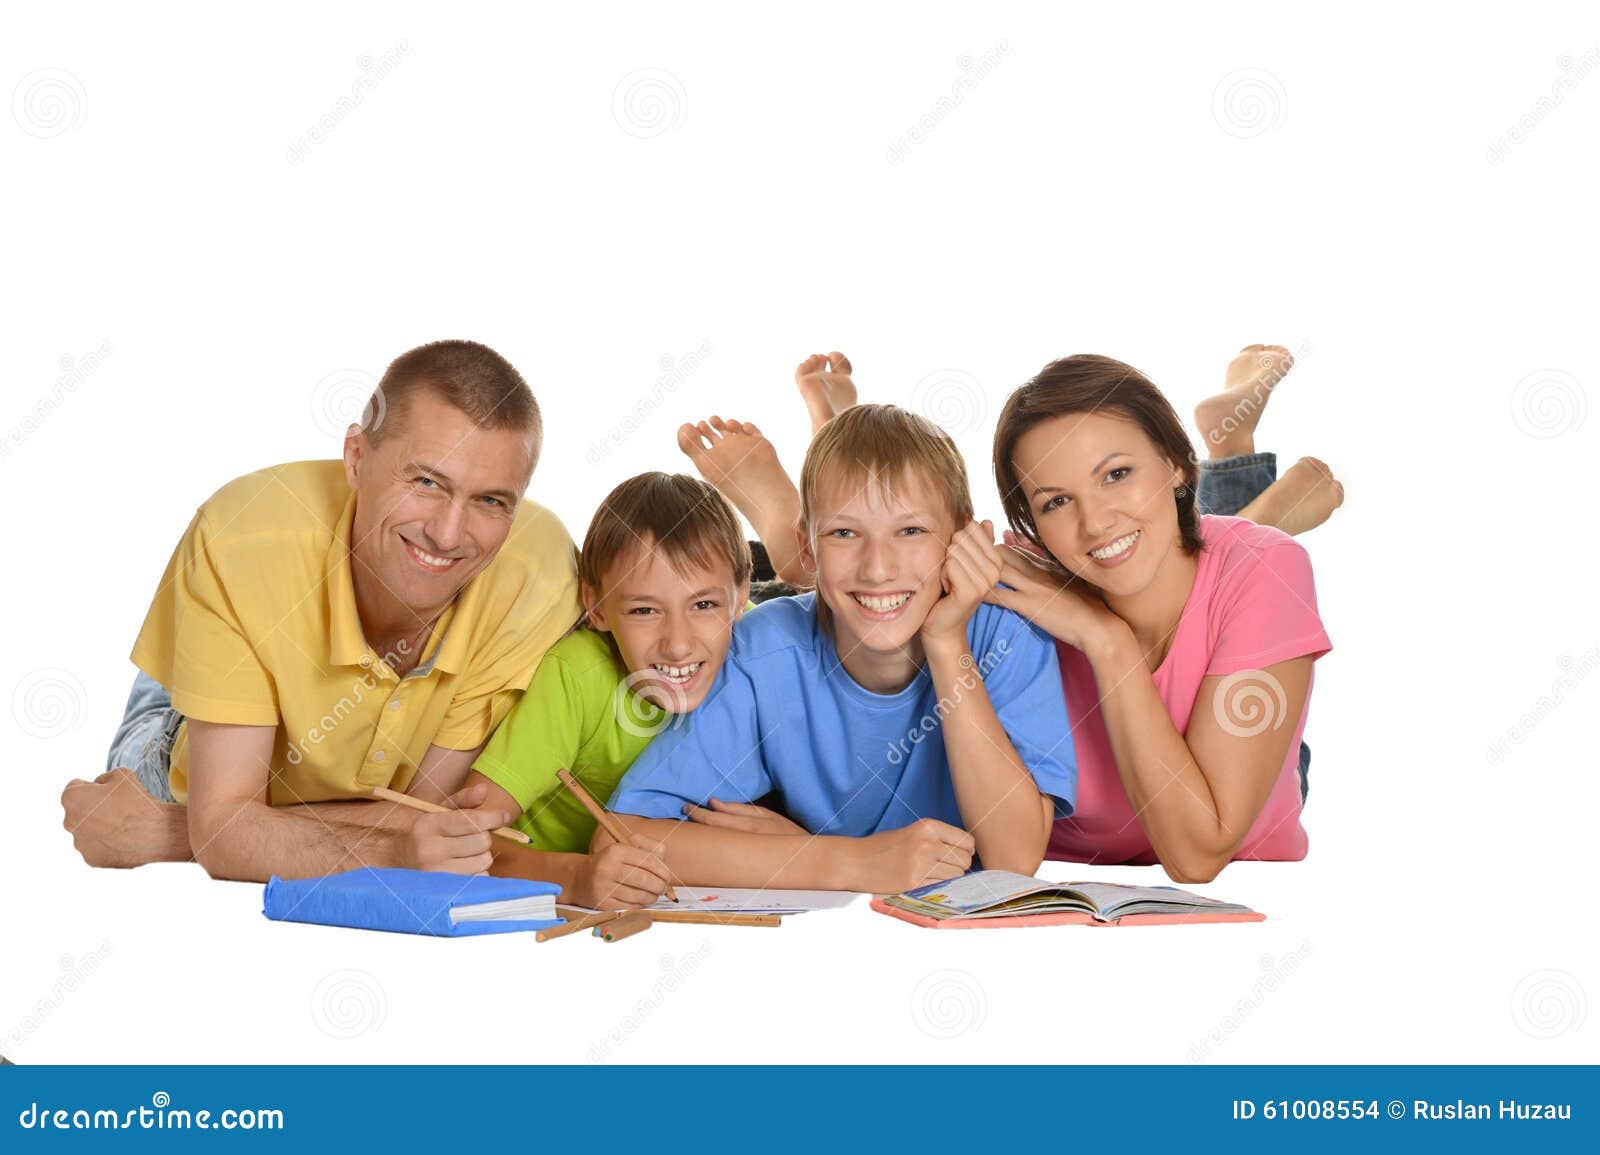 Children with autism & homework – 11 tips for success